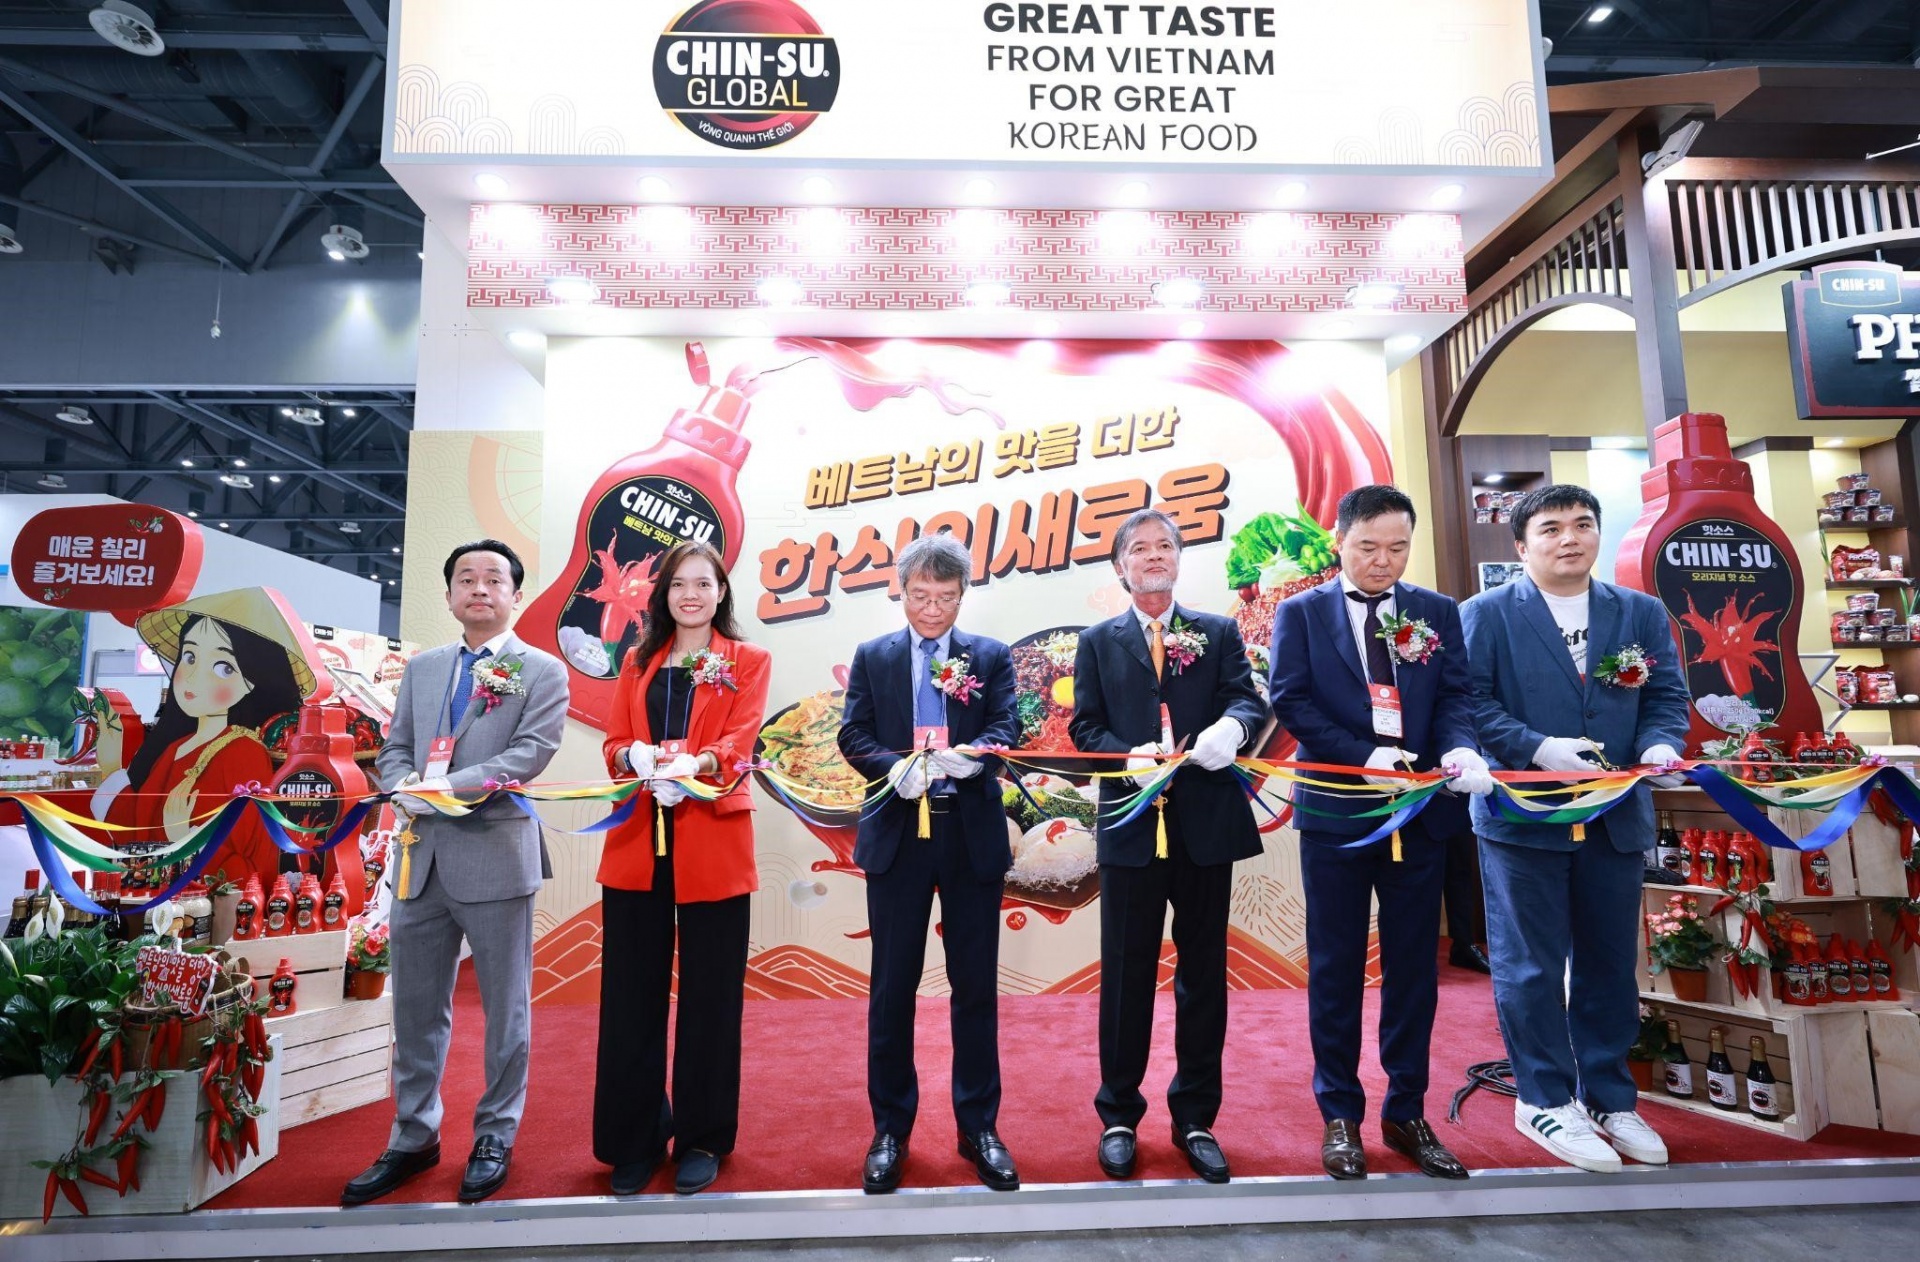 Chin-su leaves strong impression at Seoul Food 2023